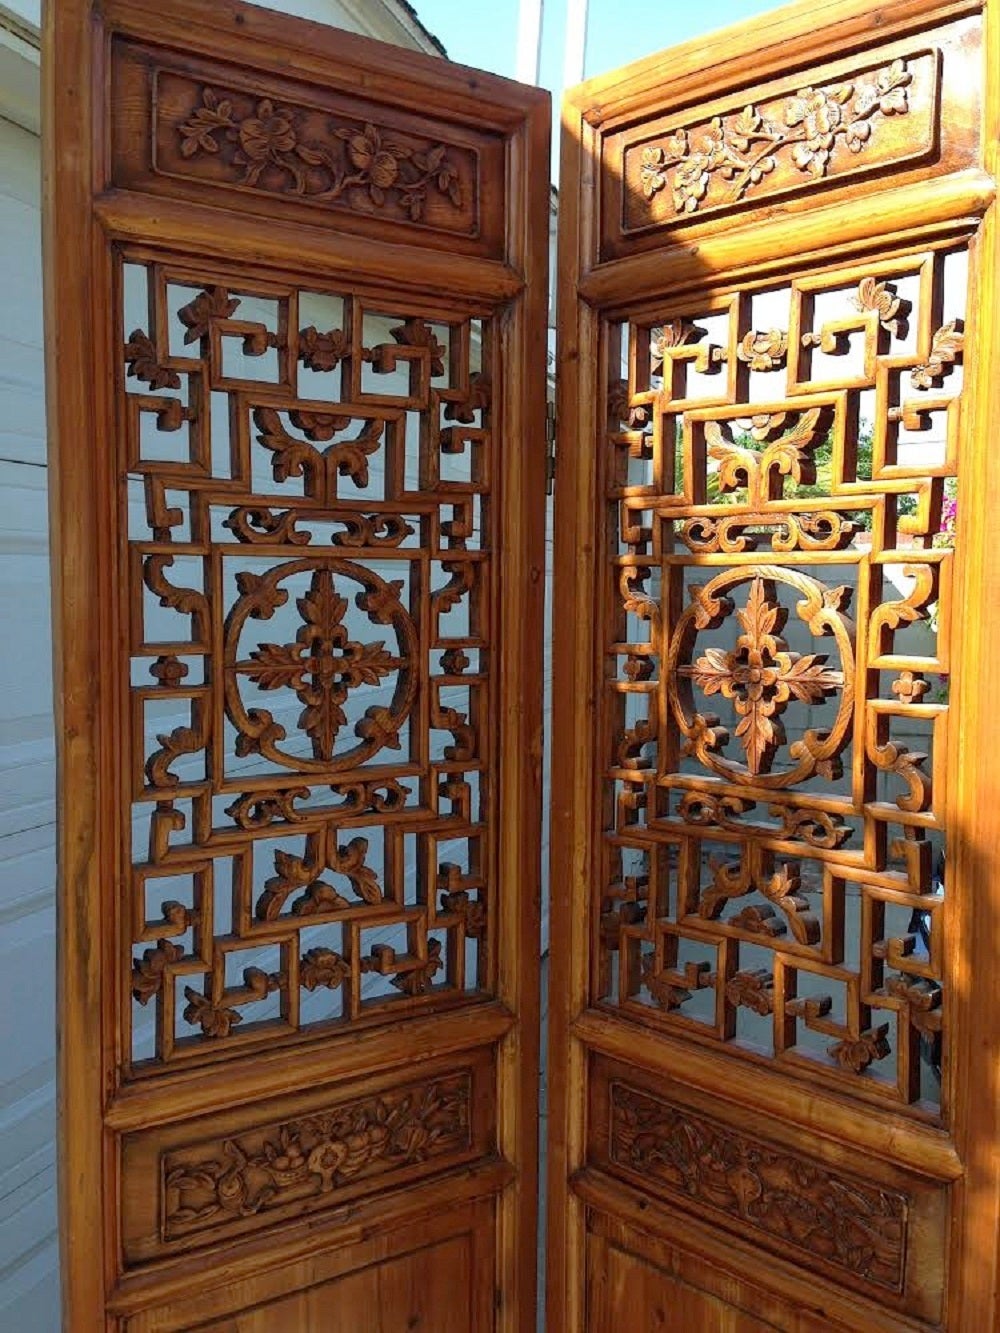 Room Divider, Large Eight-Panel Chinese Antique Room Divider or Screen In Excellent Condition For Sale In Glendale, CA